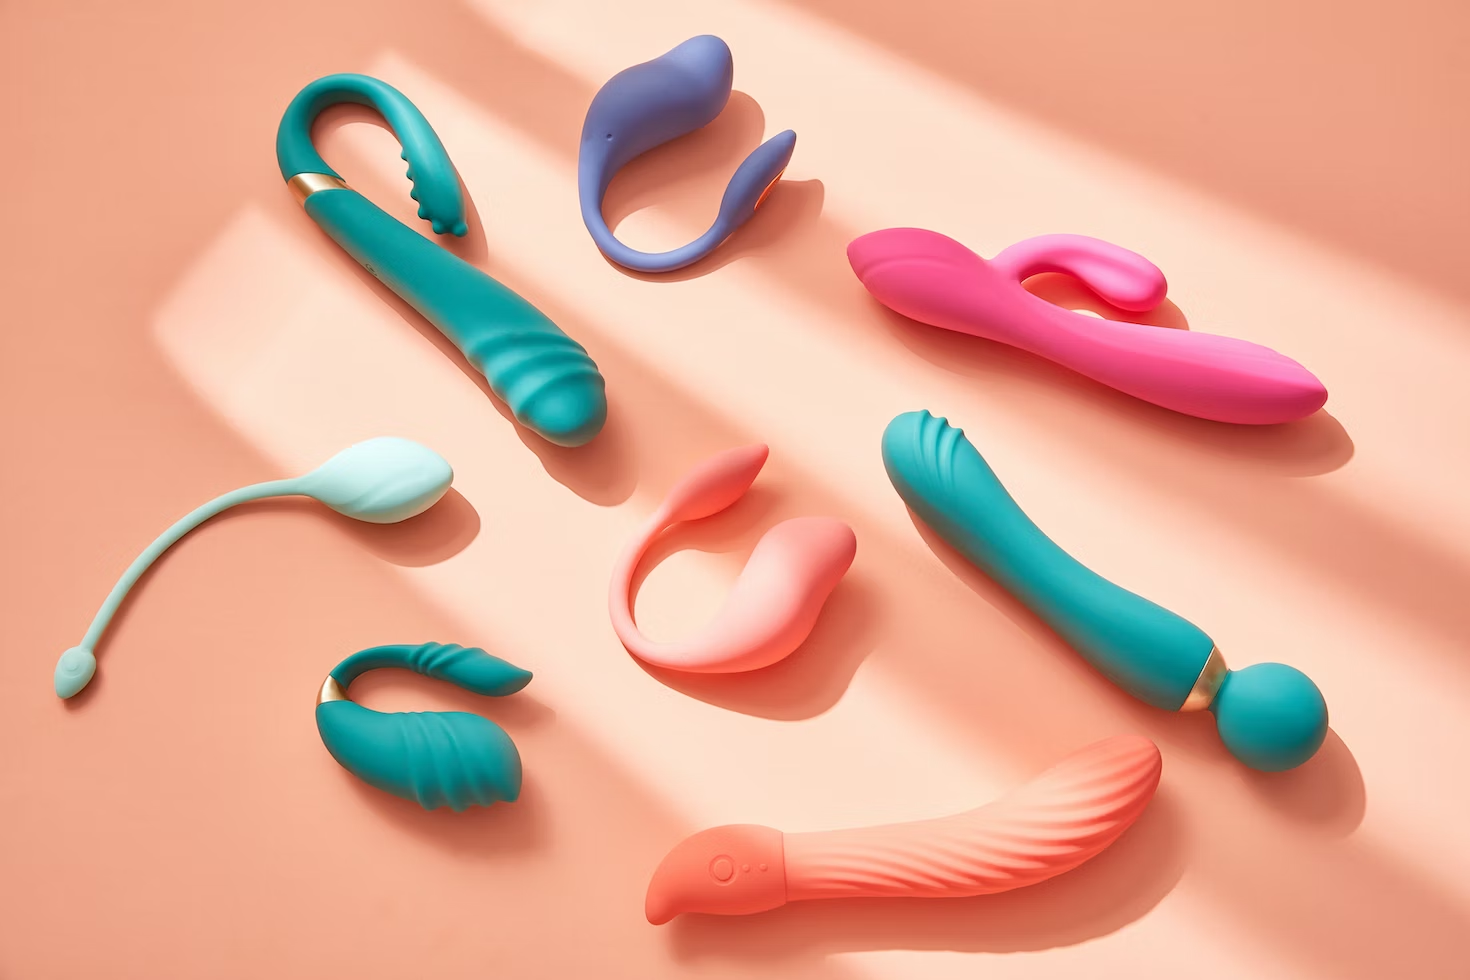 Image displaying a variety of eight vibrators in diverse colors, shapes, and sizes.